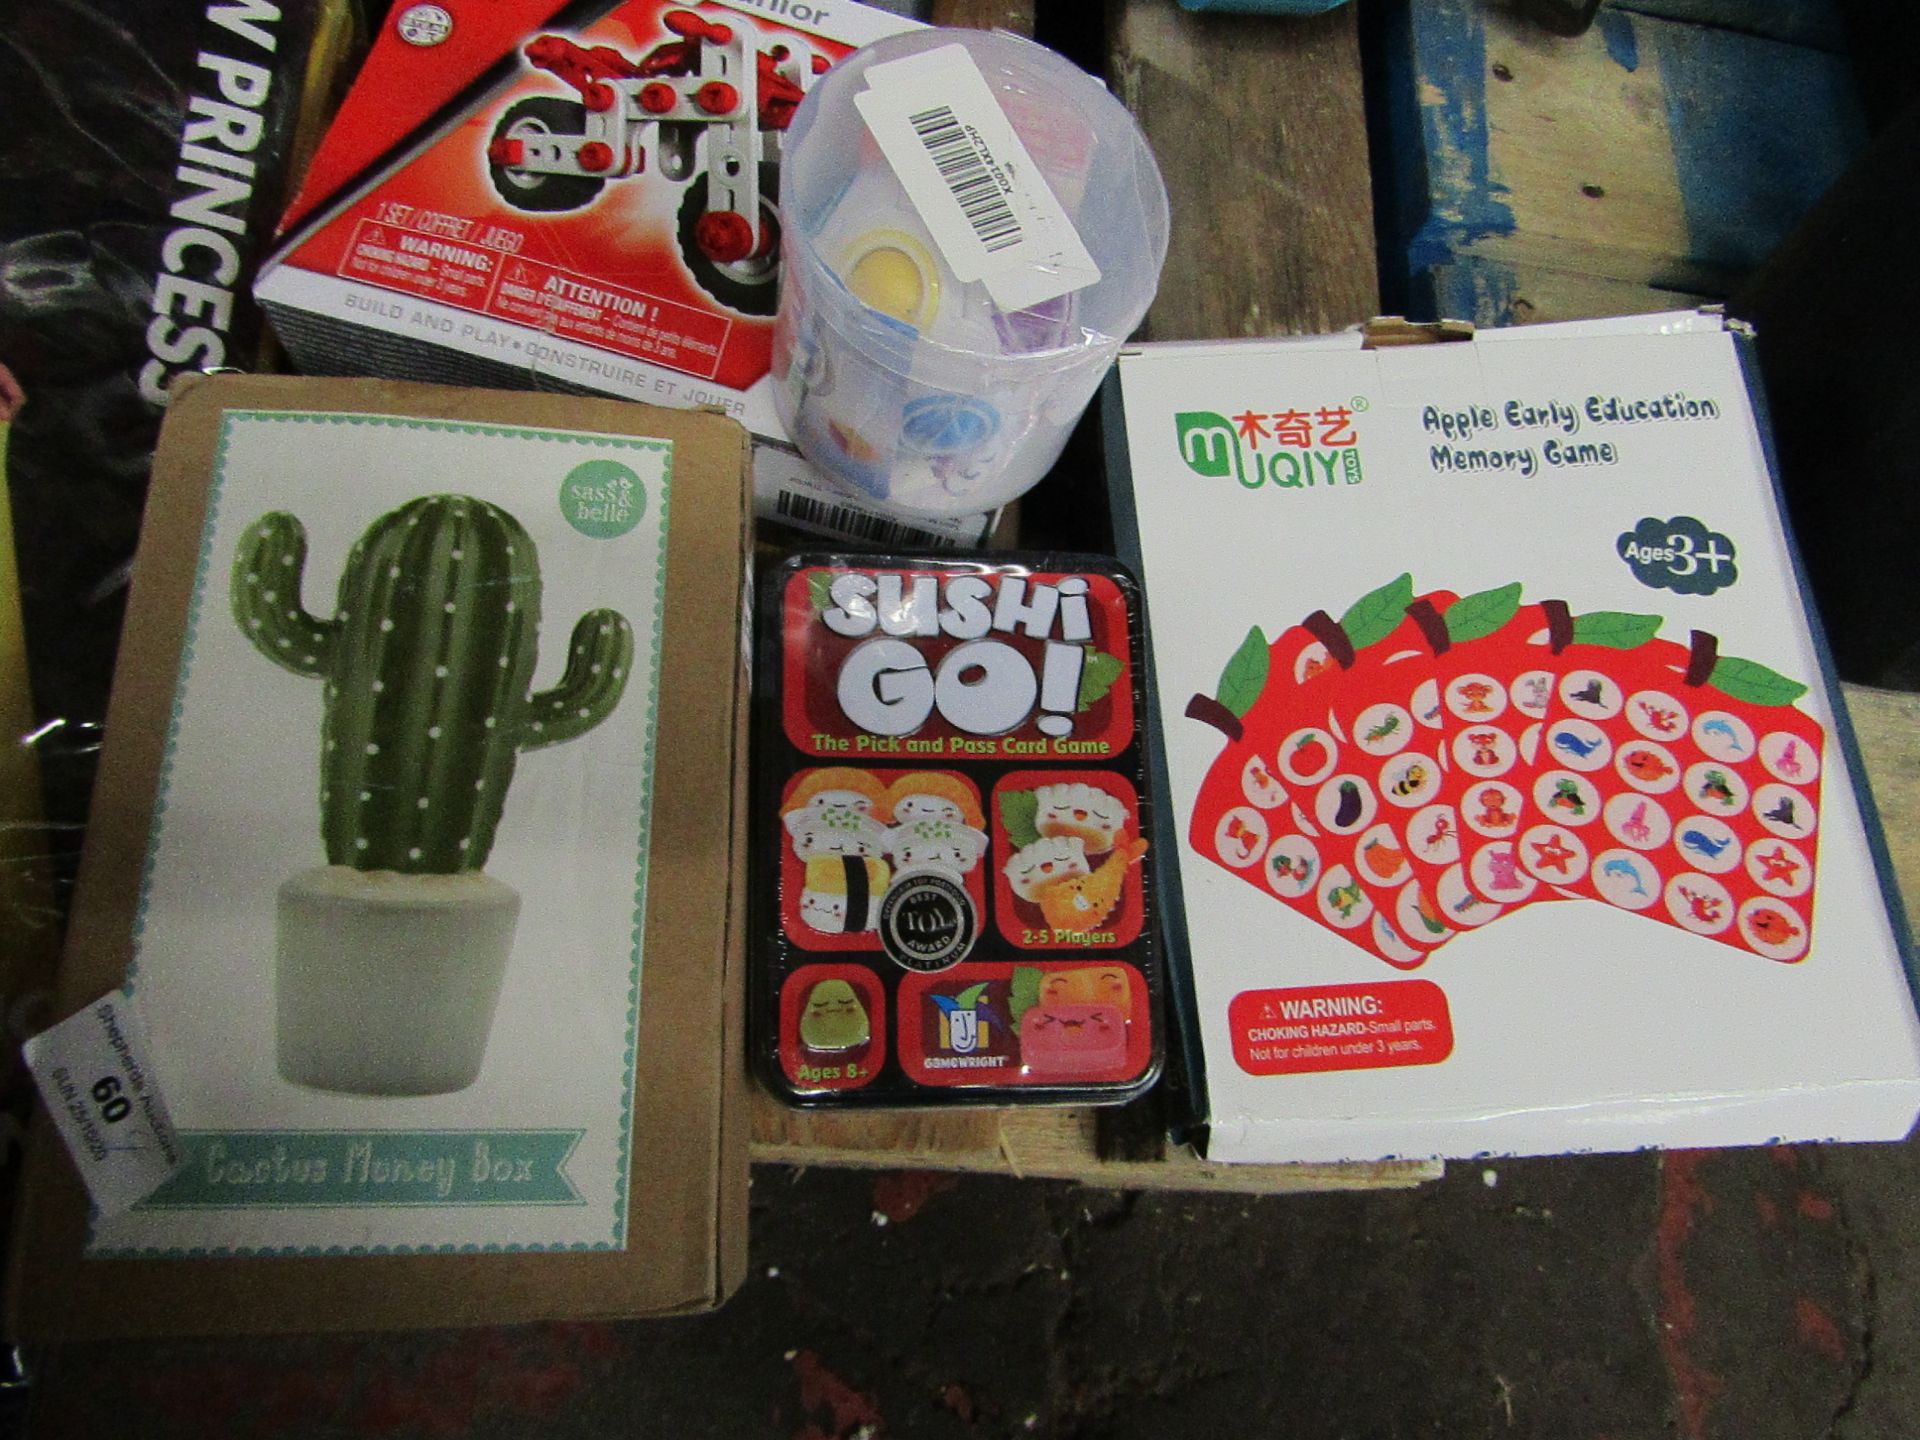 4 Items Being a Sushi Go Card Game (new), Cactus money Box, Magic Cube Ball & an Apple Early